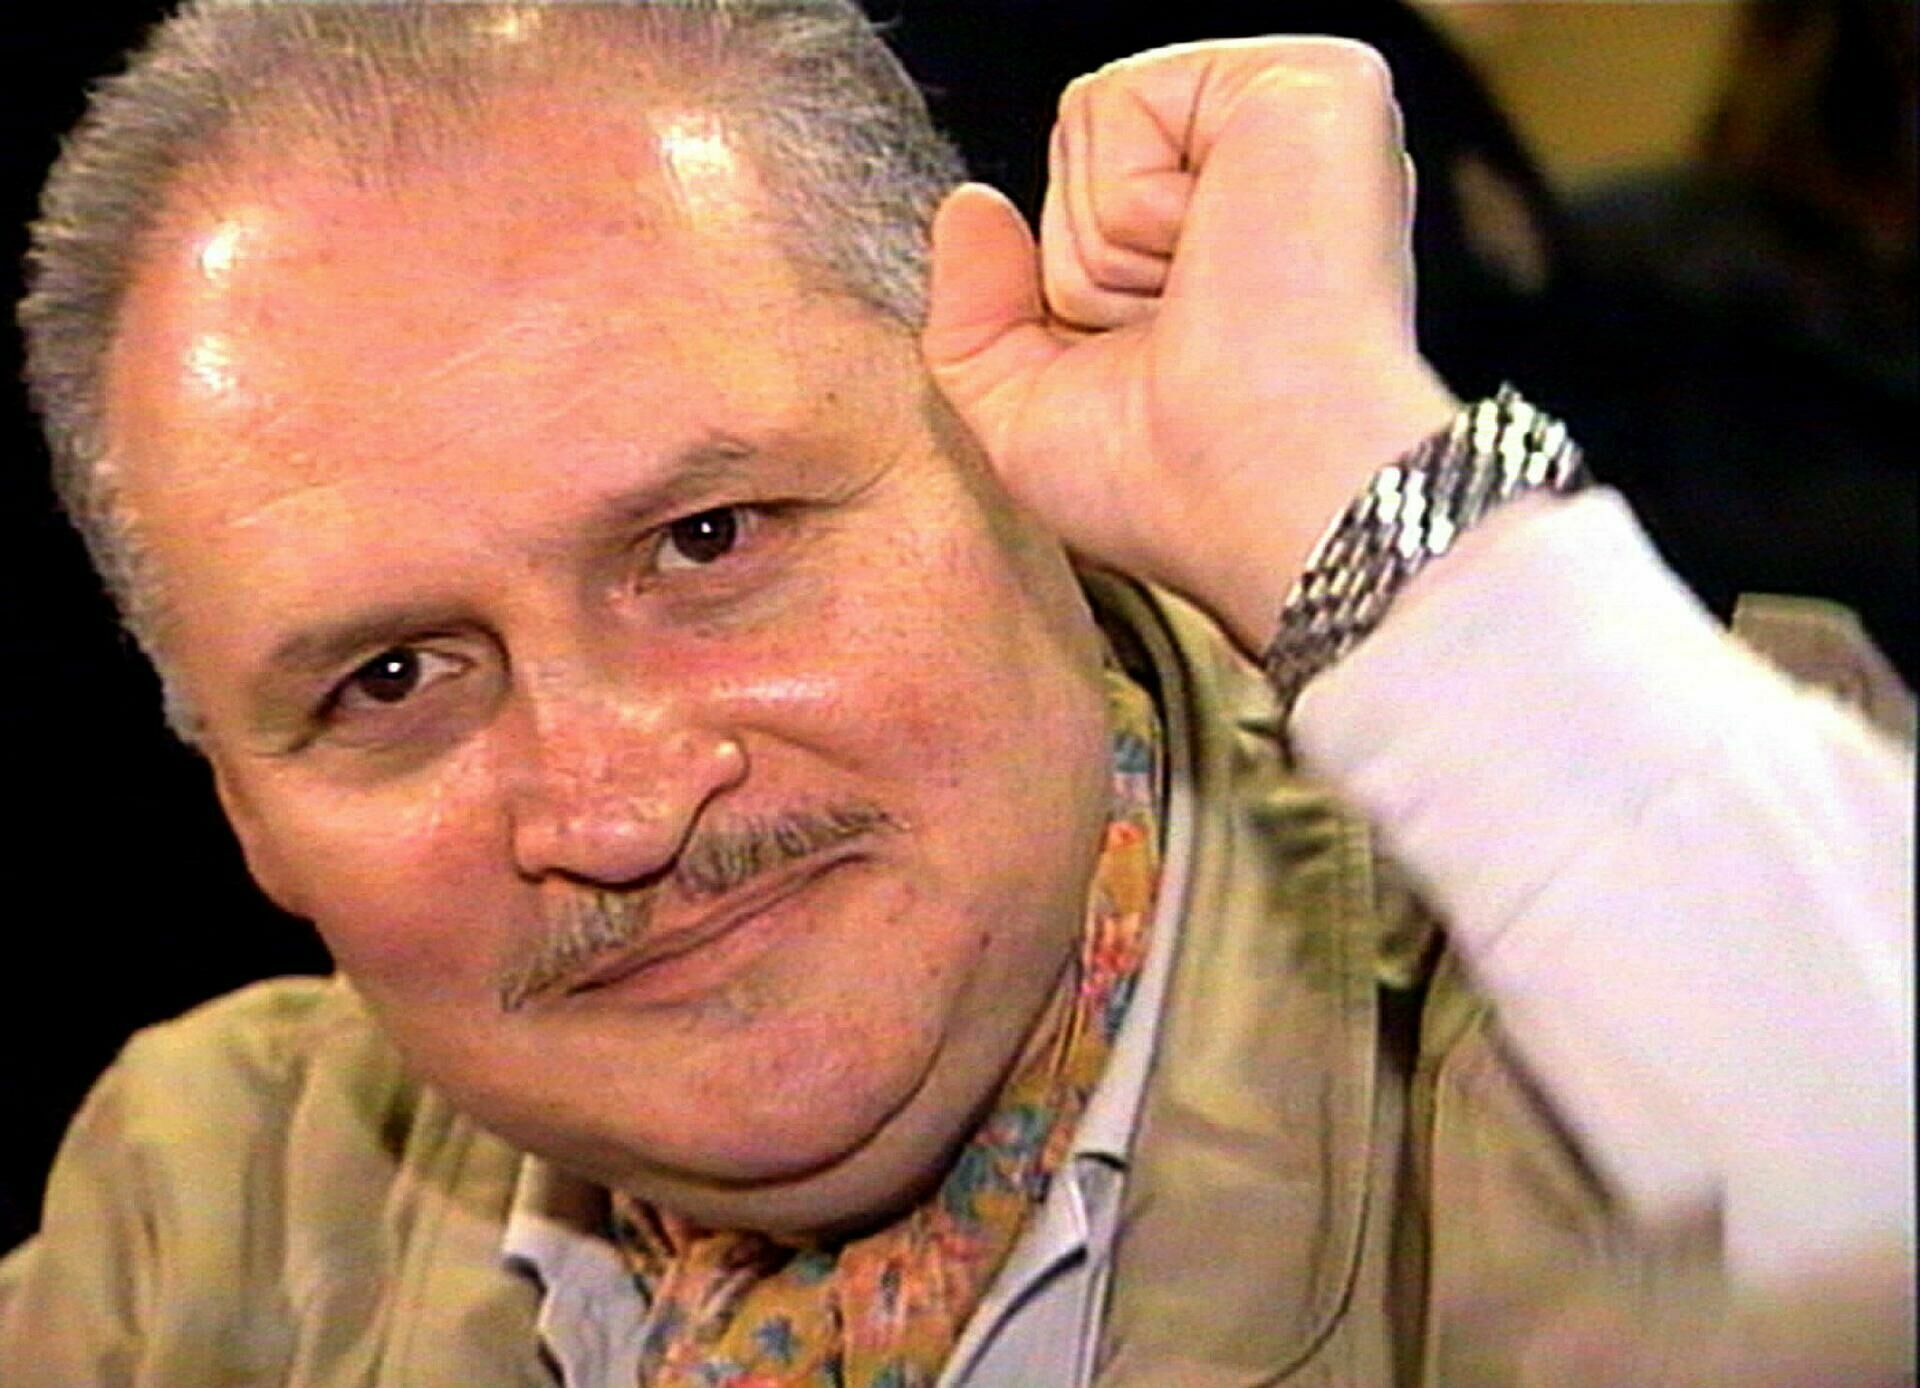 Terrorist Carlos Jackal: "I'm tired of living in handcuffs and I want to be free!"